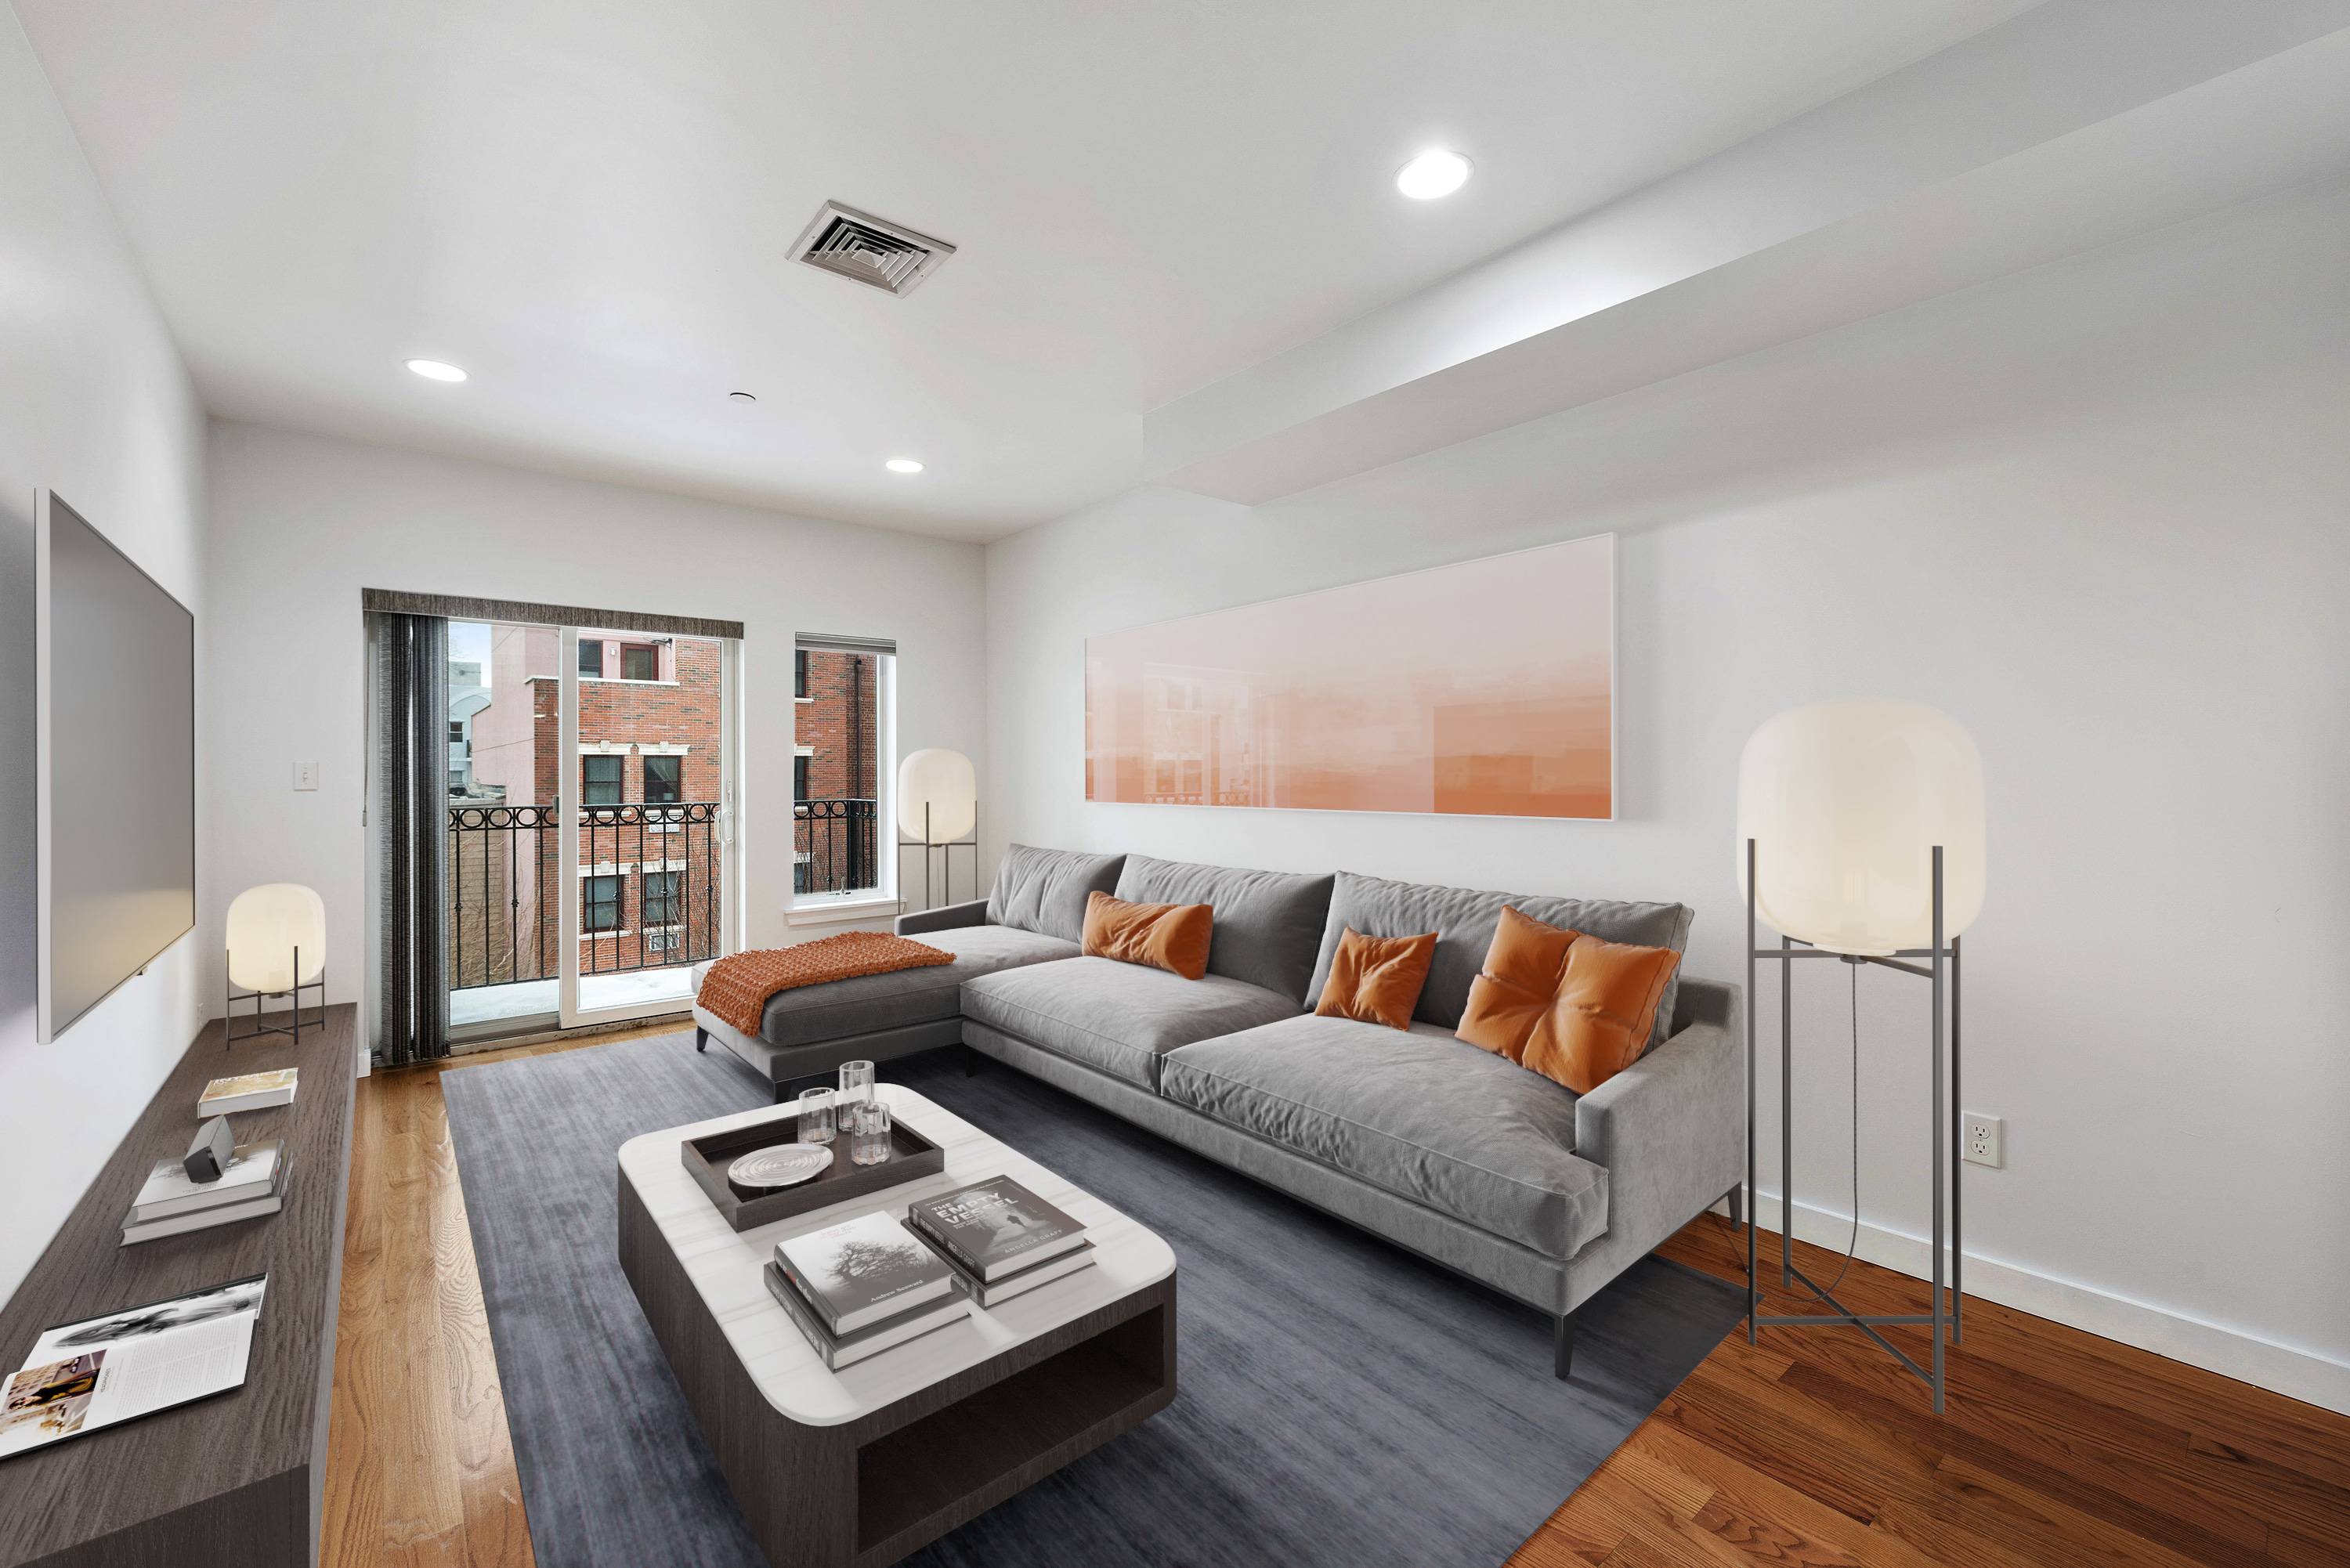 Experience Astoria Condo perfection ; in this pristine, spacious, 1 Bed 1 Bath residence.